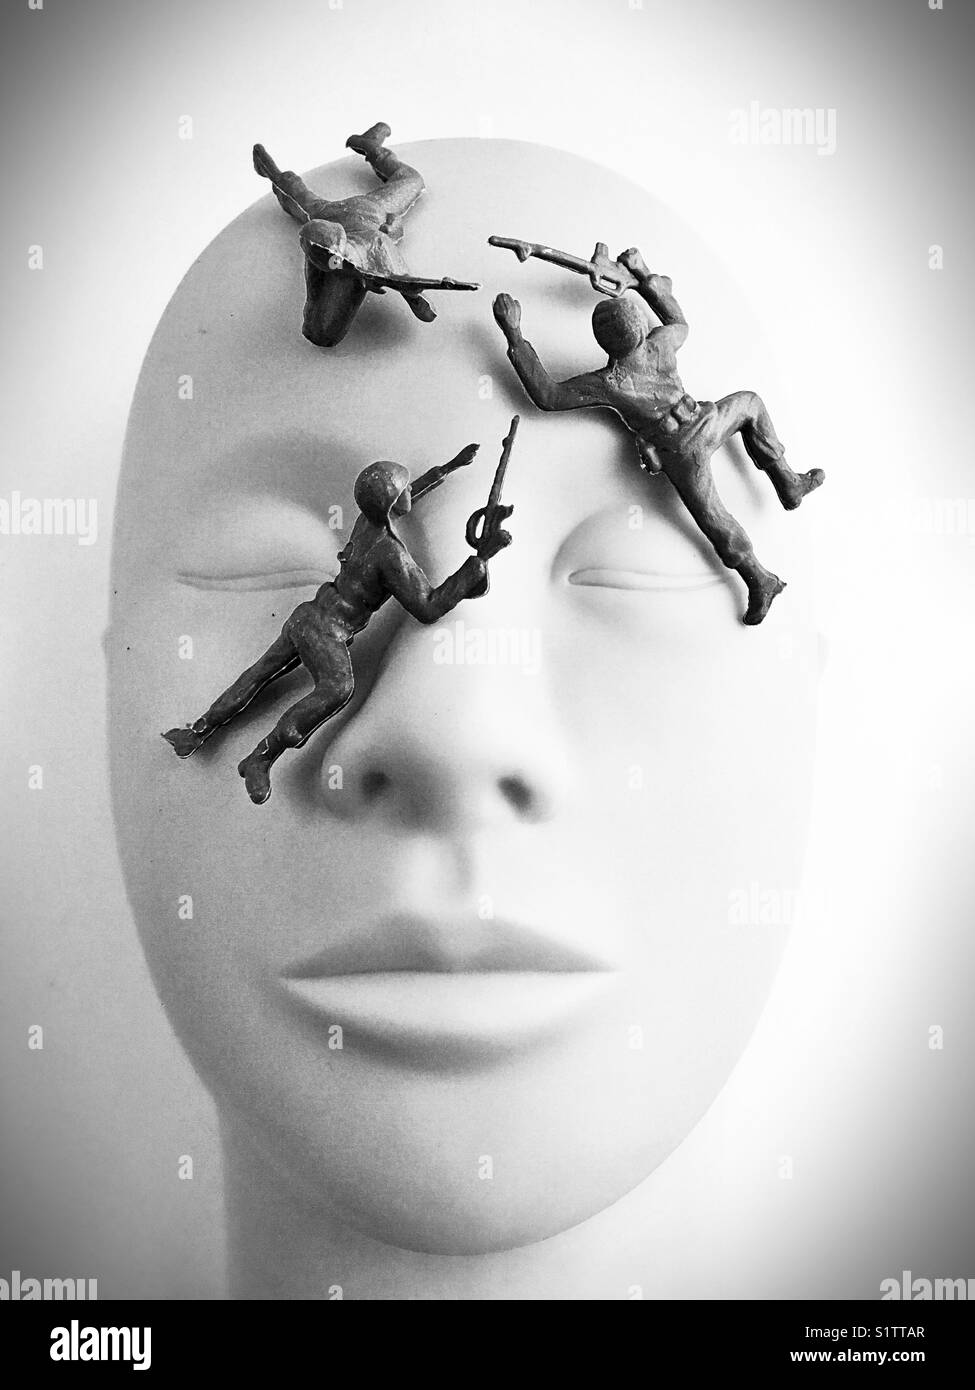 Toy plastic soldiers climbing on a mannequin head. Stock Photo